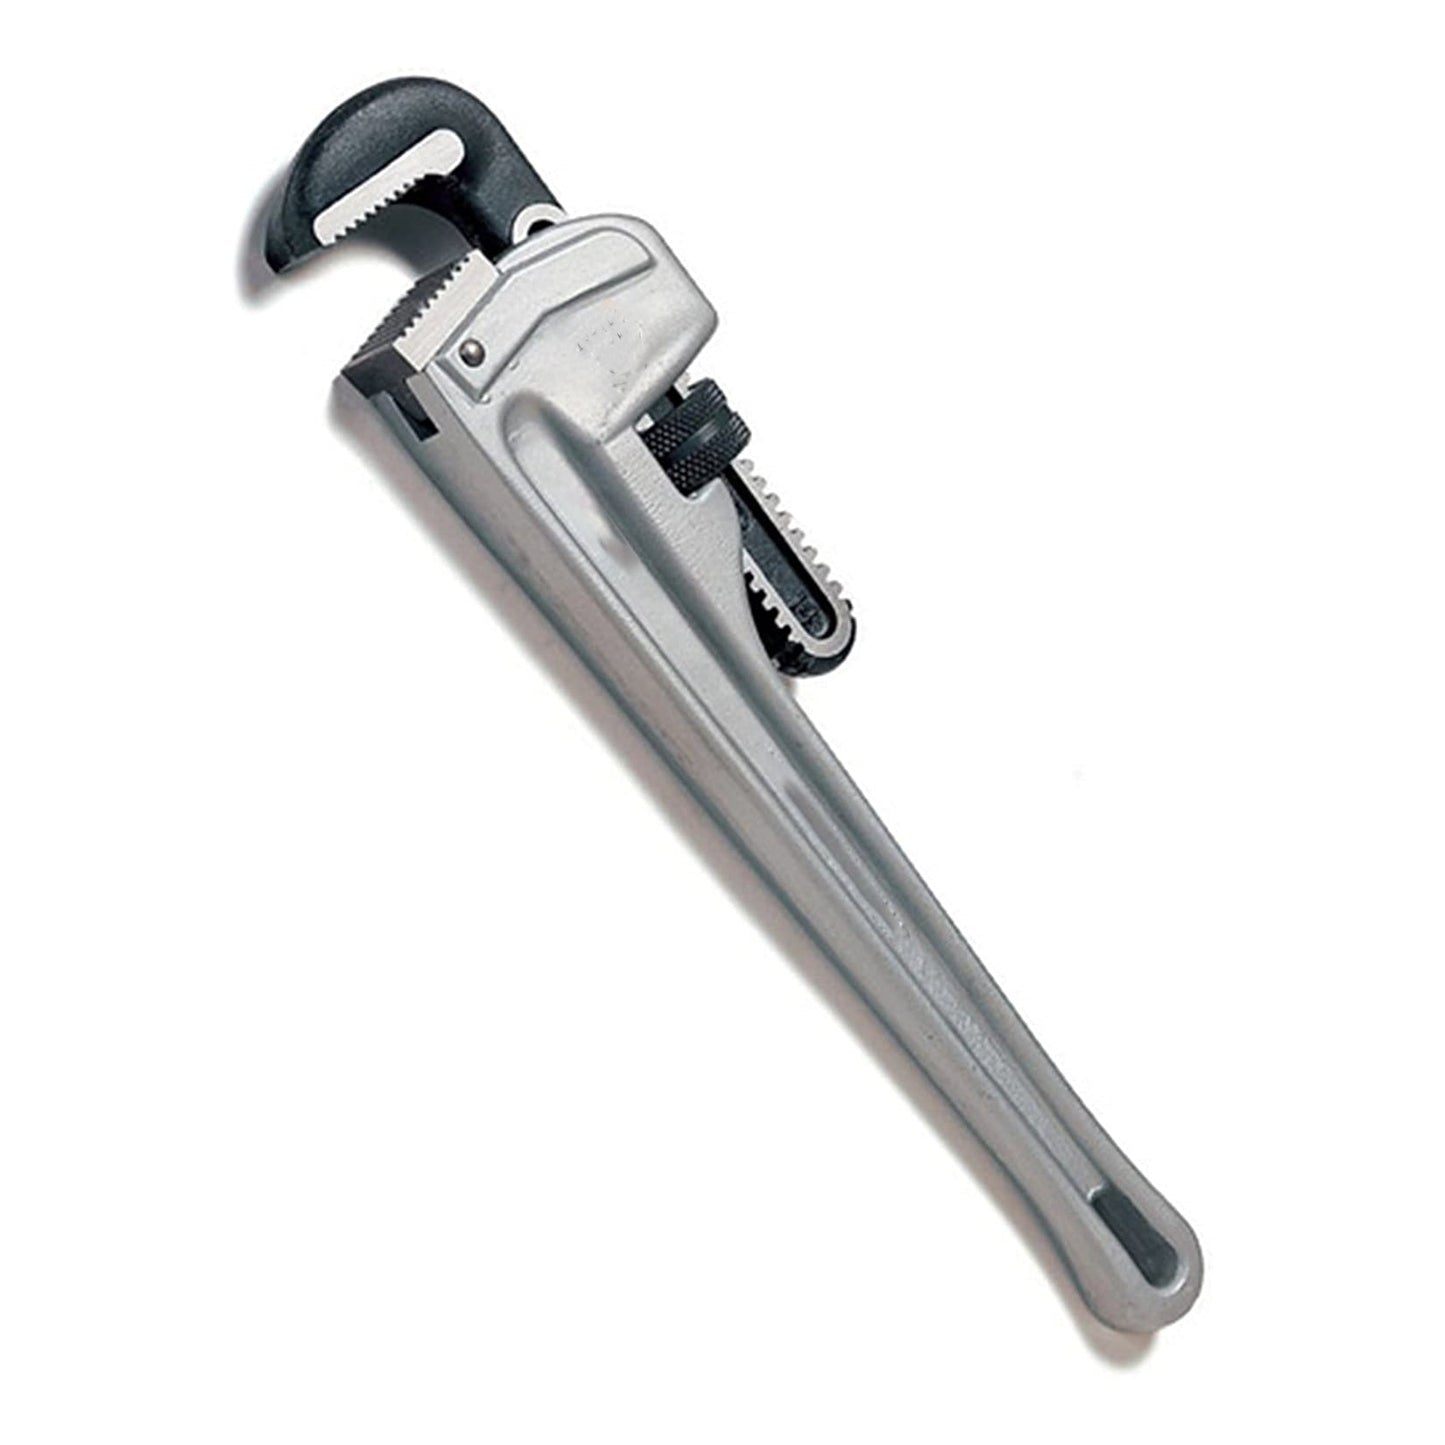 findmall  Aluminum Straight Pipe Wrench, 12 Inch Plumbing Wrench, Pipe Capacity 2 Inch, for Pipe Diameters of 1/2 Inch to 1-1/2 Inch FINDMALLPARTS